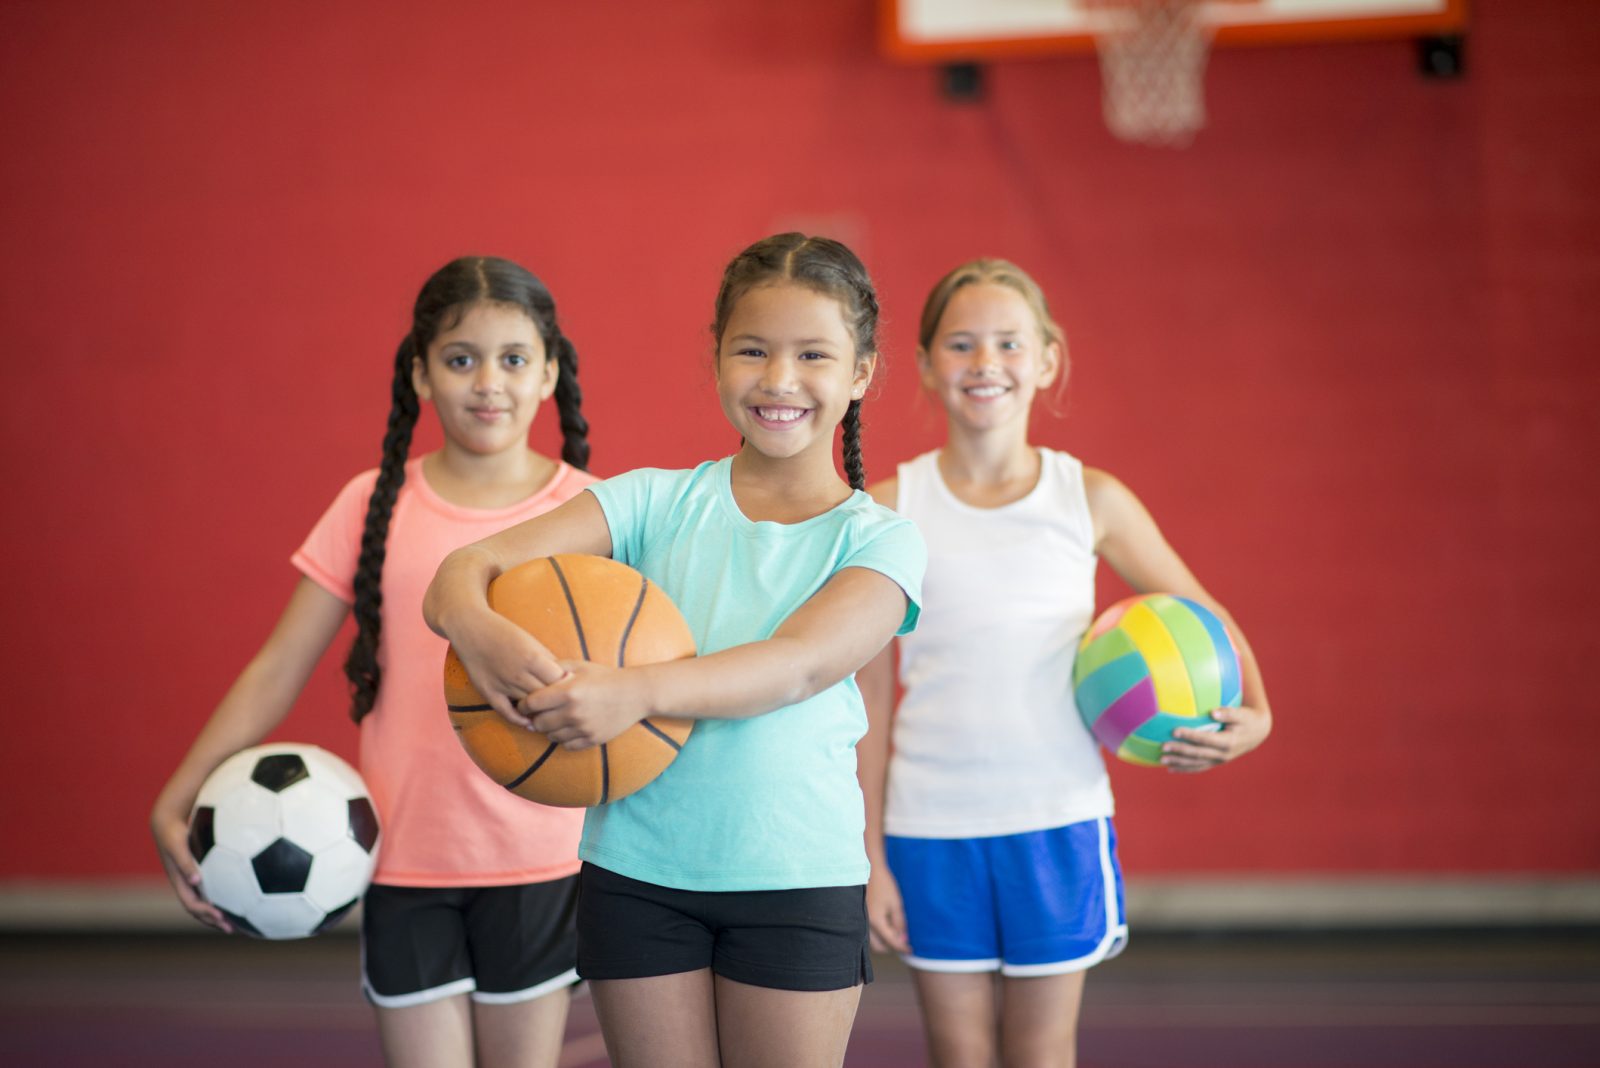 Three girls stand in front of a red wall in a gymnasium. The girl on the left is wearing a pink shirt and holding a soccer ball. The girl in the middle is wearing a teal shirt and holding a basketball. The girl on the right is wearing a white shirt and holding a volleyball.